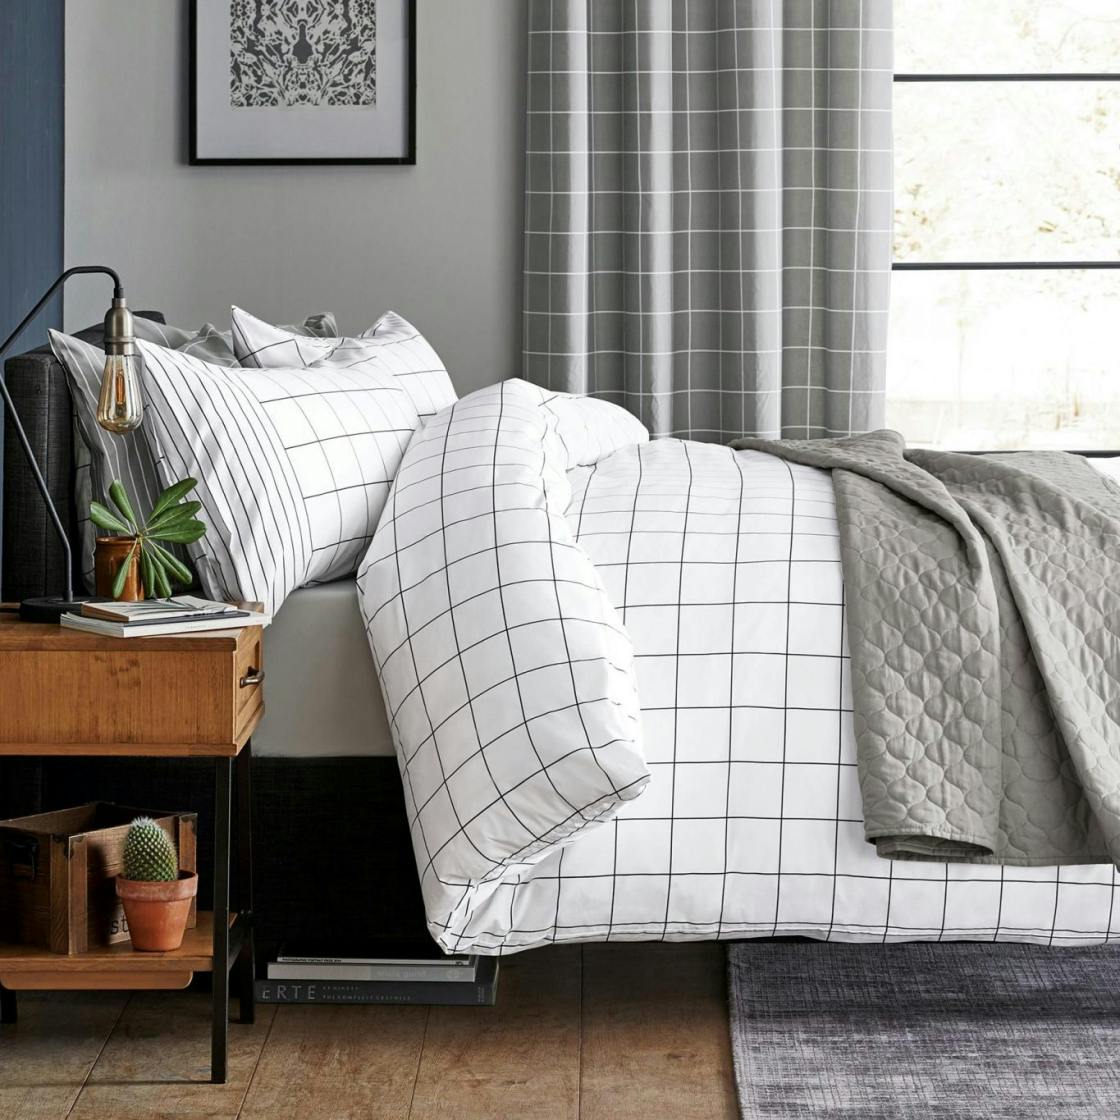 Shop The Most Beautiful Sheets For Grown Up Bedrooms